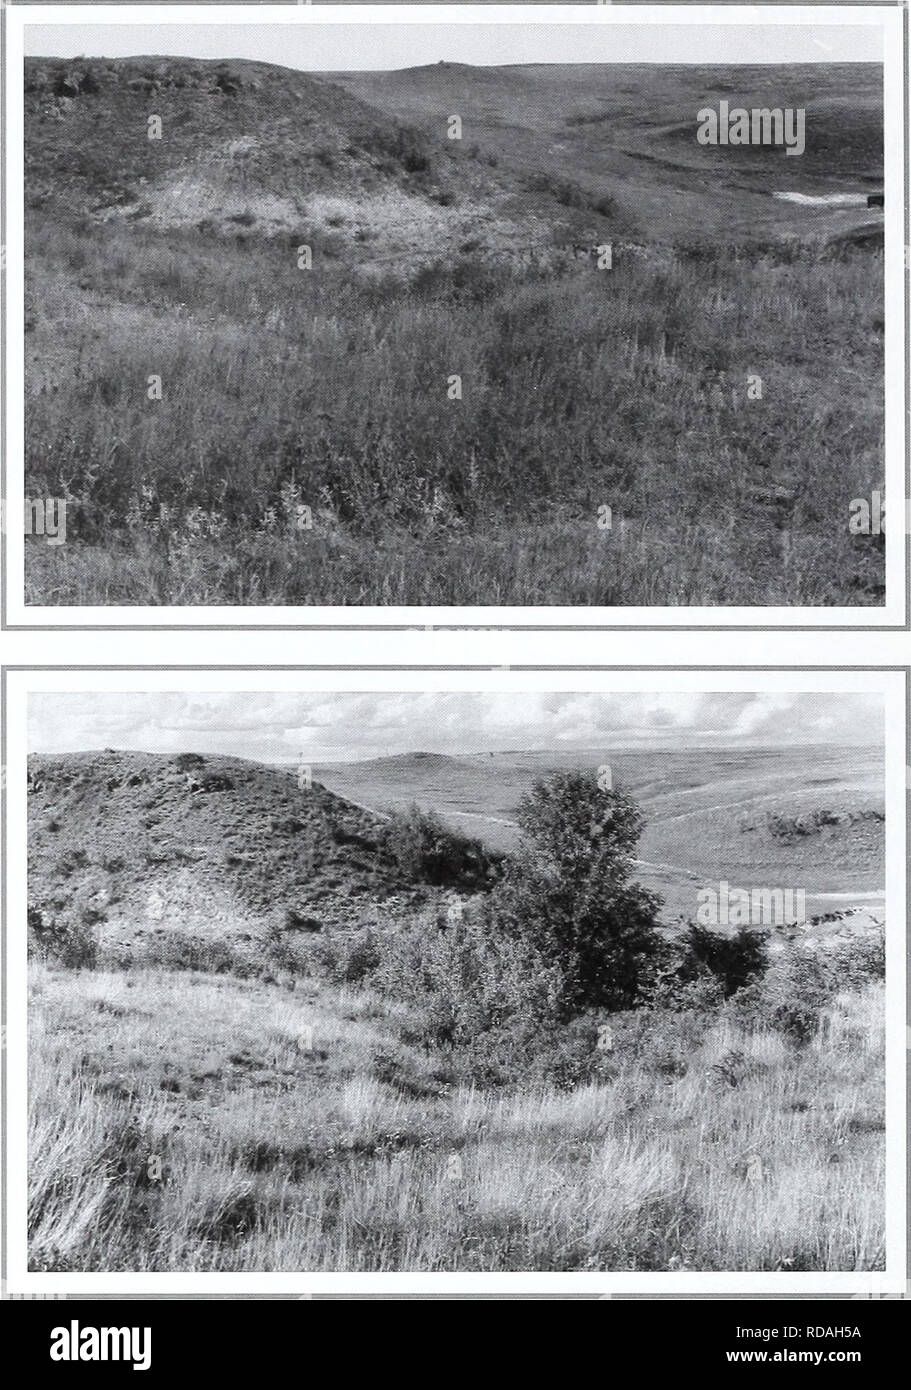 . Eighty years of vegetation and landscape changes in the Northern Great Plains : a photographic record. Range plants; Landscape; Botany; forbs; grasses; landscapes; botanical composition; shrubs; trees. Original Photograph September 22. 1924. Shantz G2-8-1924. Facing north. First Retake and Description June 25, 1959. W.S.P., E-4-1959. Dr. Shantz had taken a series of about ten pic- tures in this area within a distance of about fifty feet. The area is a dry water course with some watering holes for cattle. The grasses here are Stipa comata and Bouteloua gracilis with some Andropogon sco- pariu Stock Photo